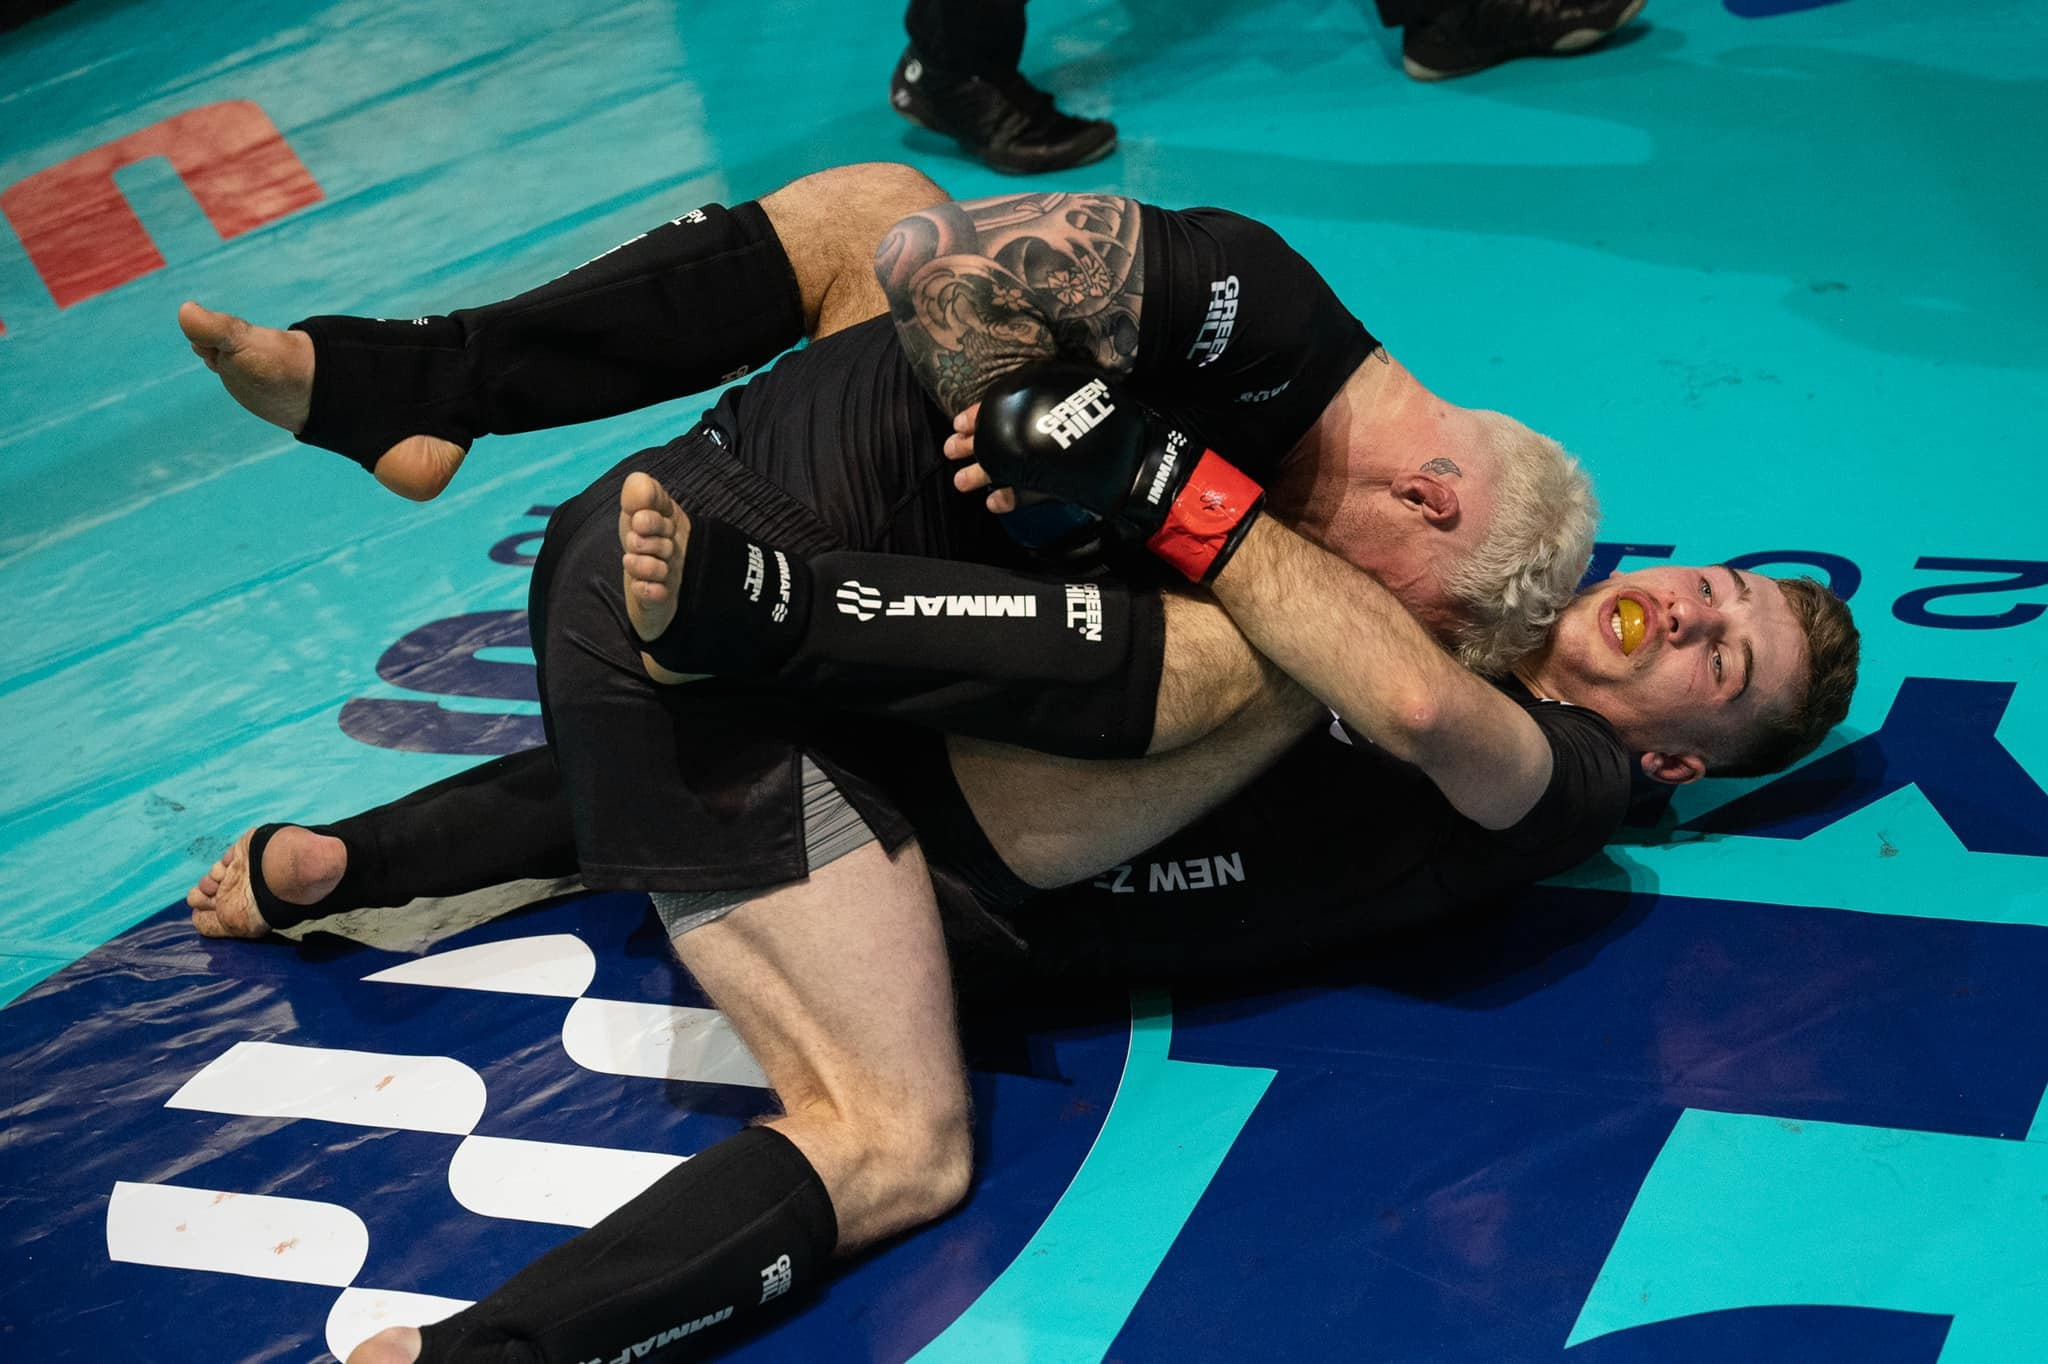 IMMAF Oceania Championships stripped of hosting rights over safety failings